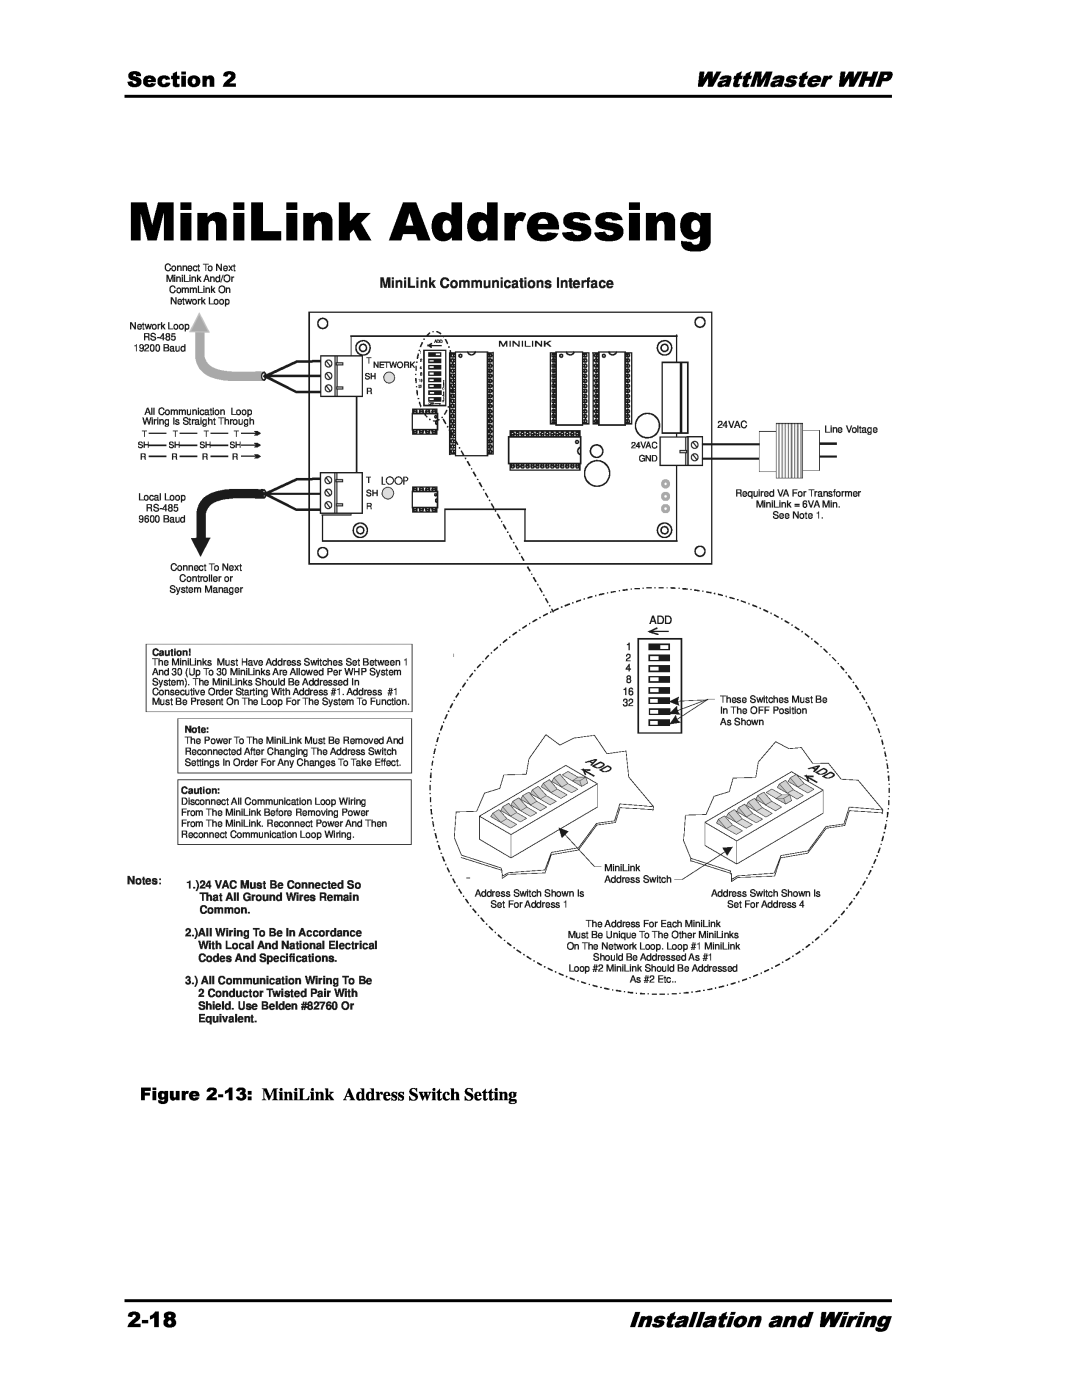 Heat Controller Water Source Heat Pump 13, MiniLink Addressing, Section, WattMaster WHP, 2-18, Installation and Wiring 